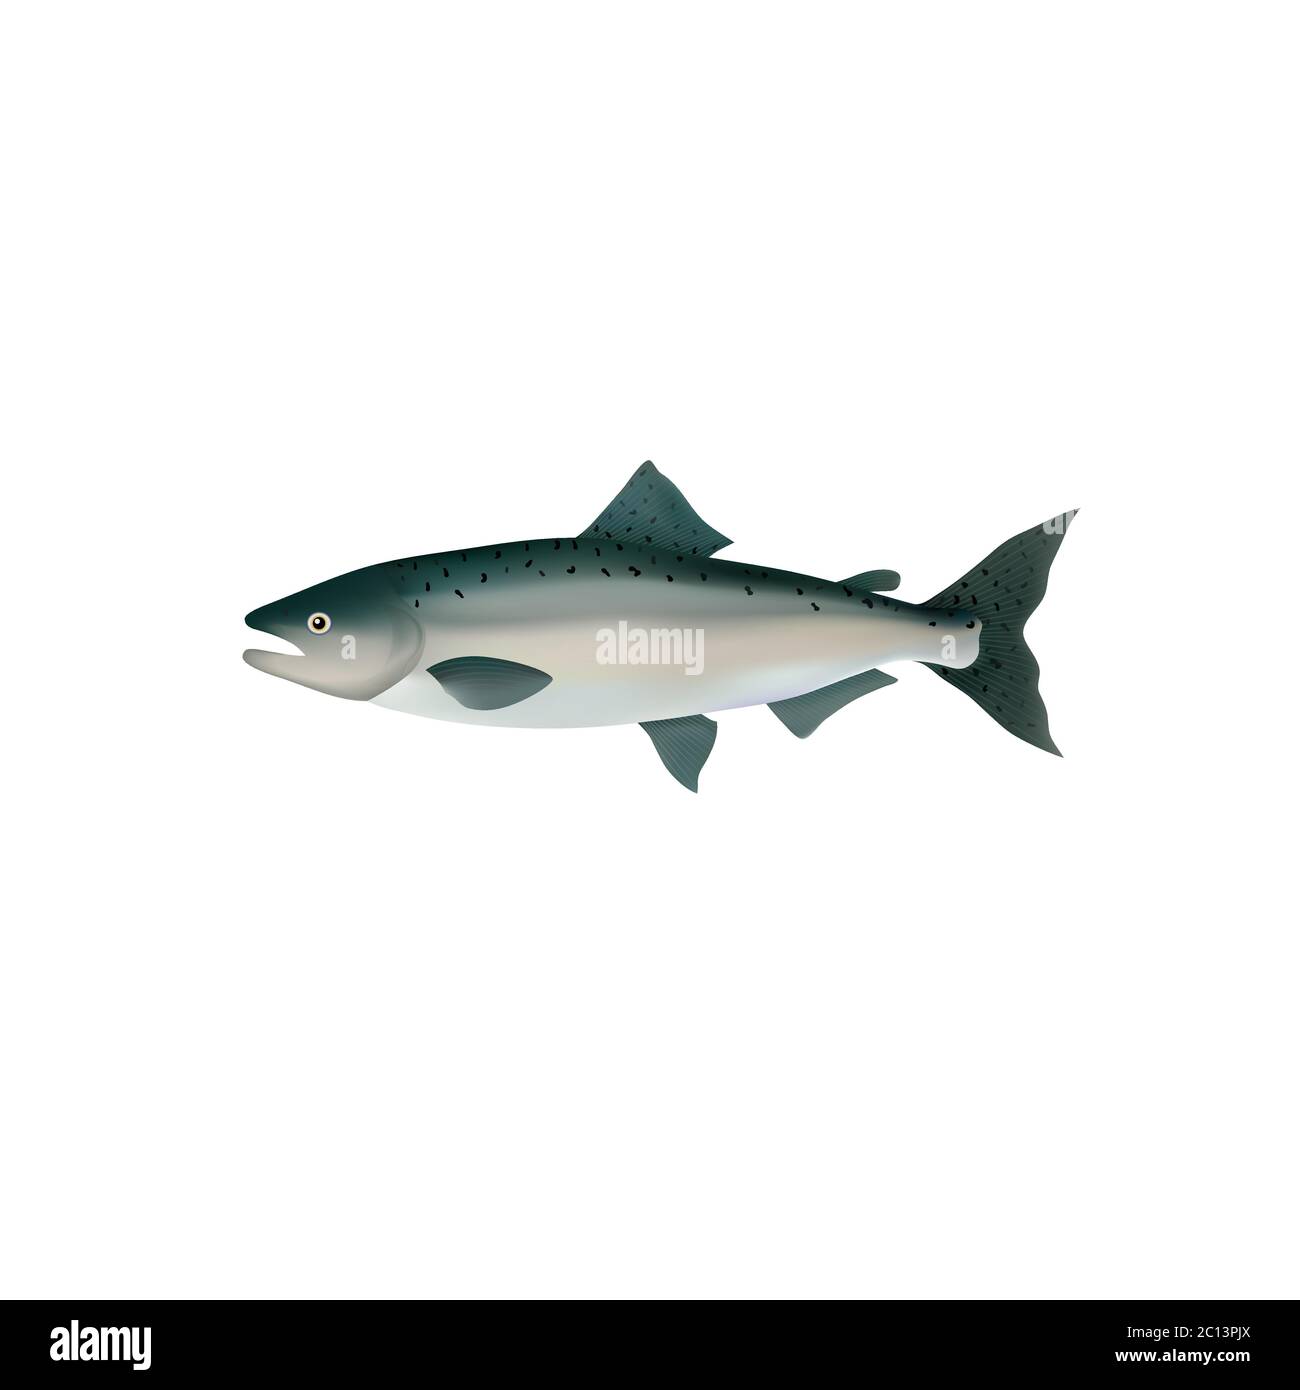 Salmon fish realistic vector illustration. Whole salmon isolated on white background. Seafood product and healthy nutrition. Stock Vector